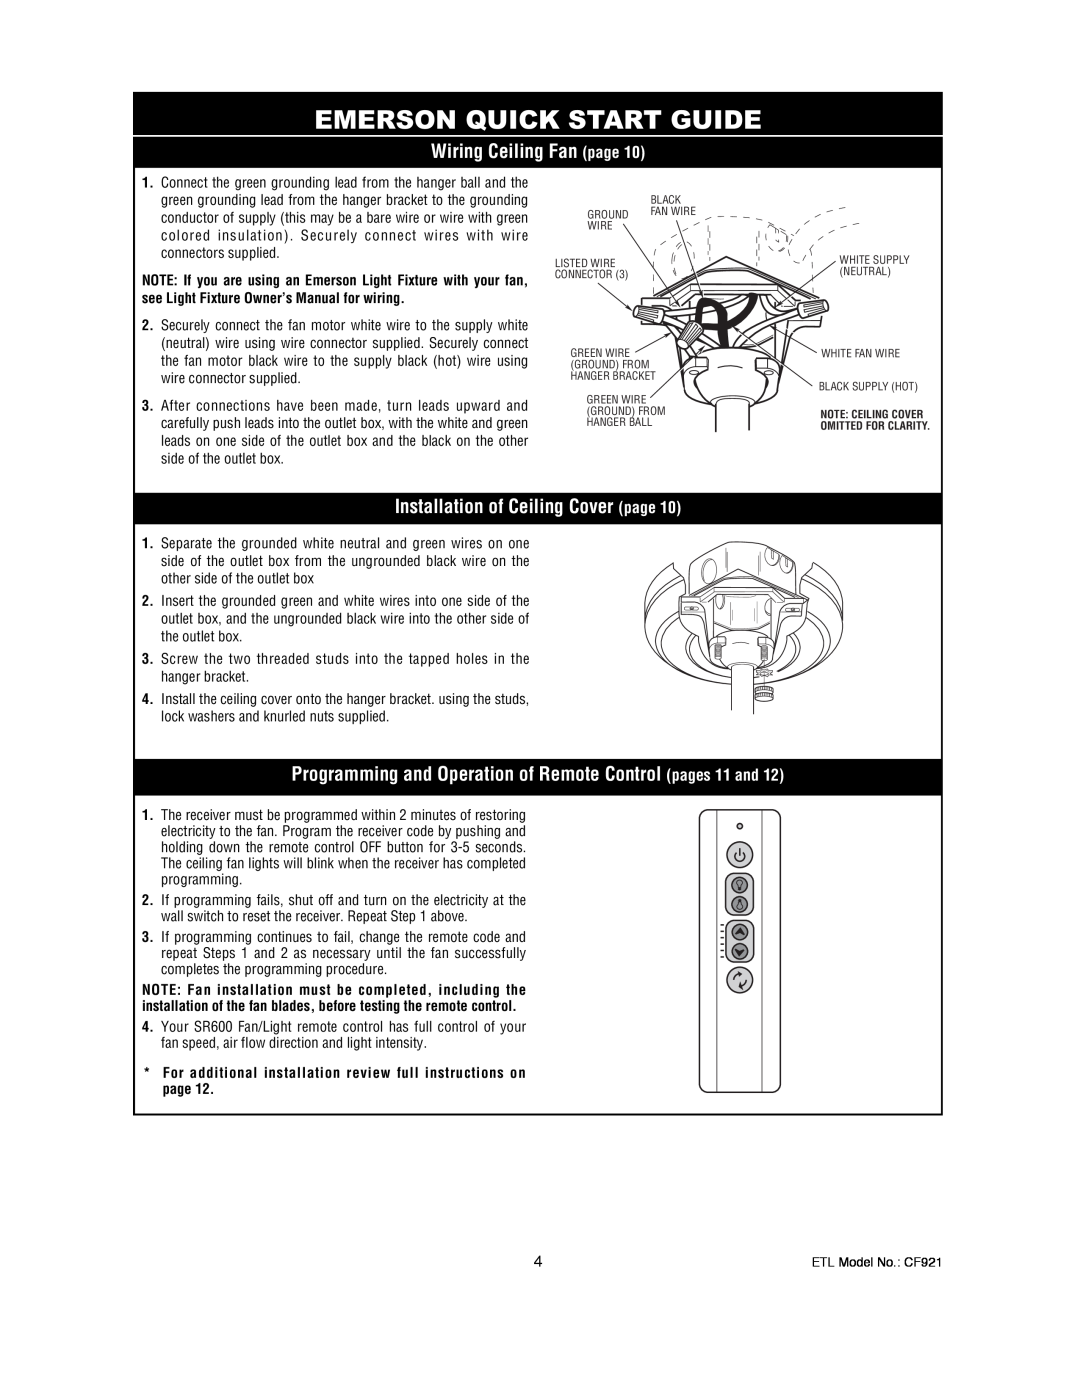 Electrolux CF921ORB00, CF921GES00 Emerson Quick Start Guide, Wiring Ceiling Fan page, Installation of Ceiling Cover page 